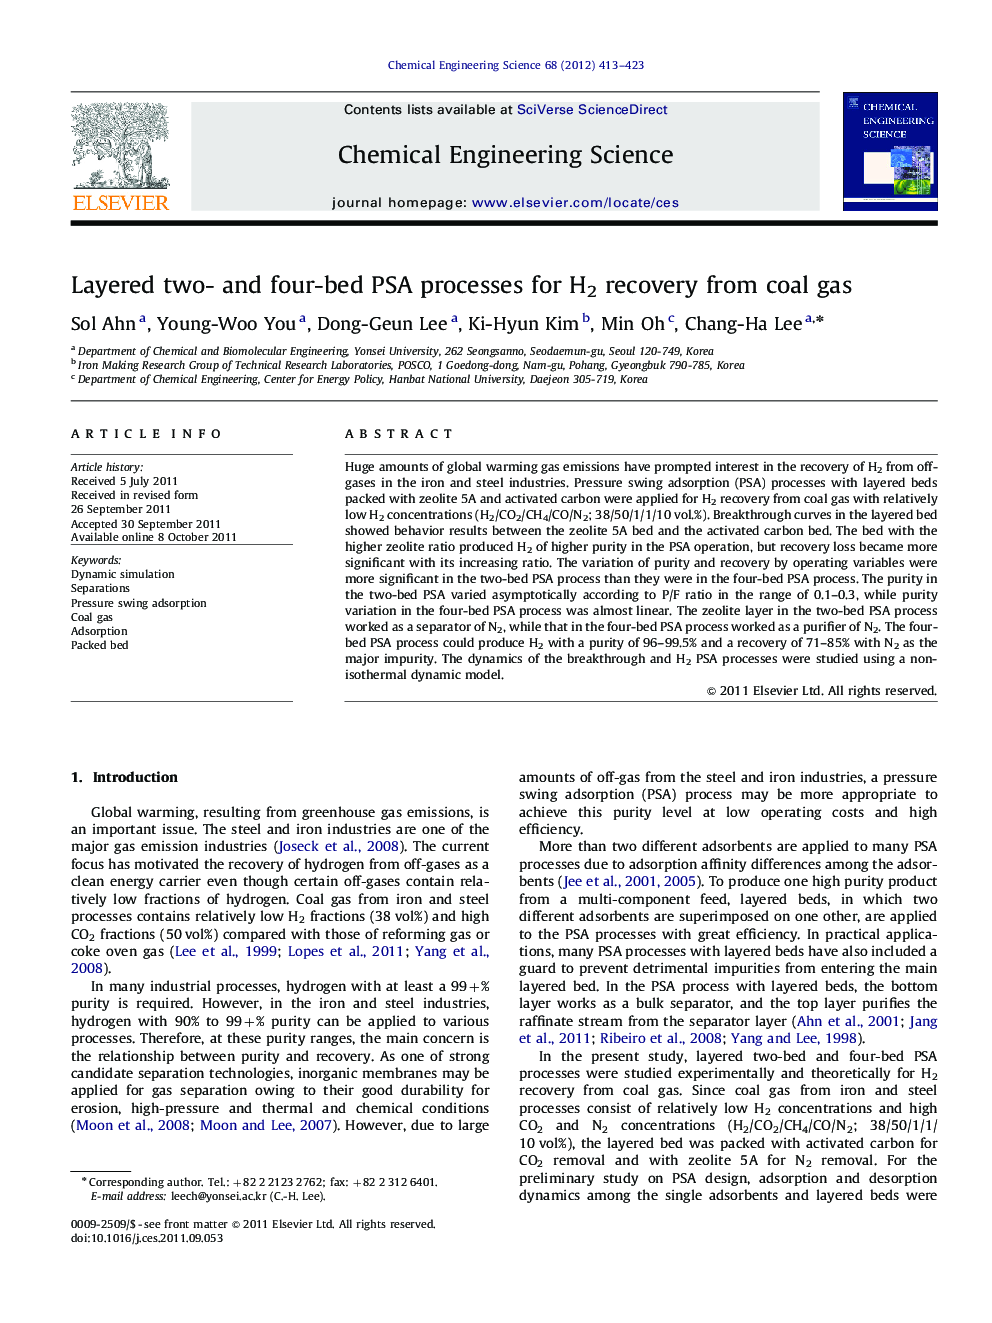 Layered two- and four-bed PSA processes for H2 recovery from coal gas